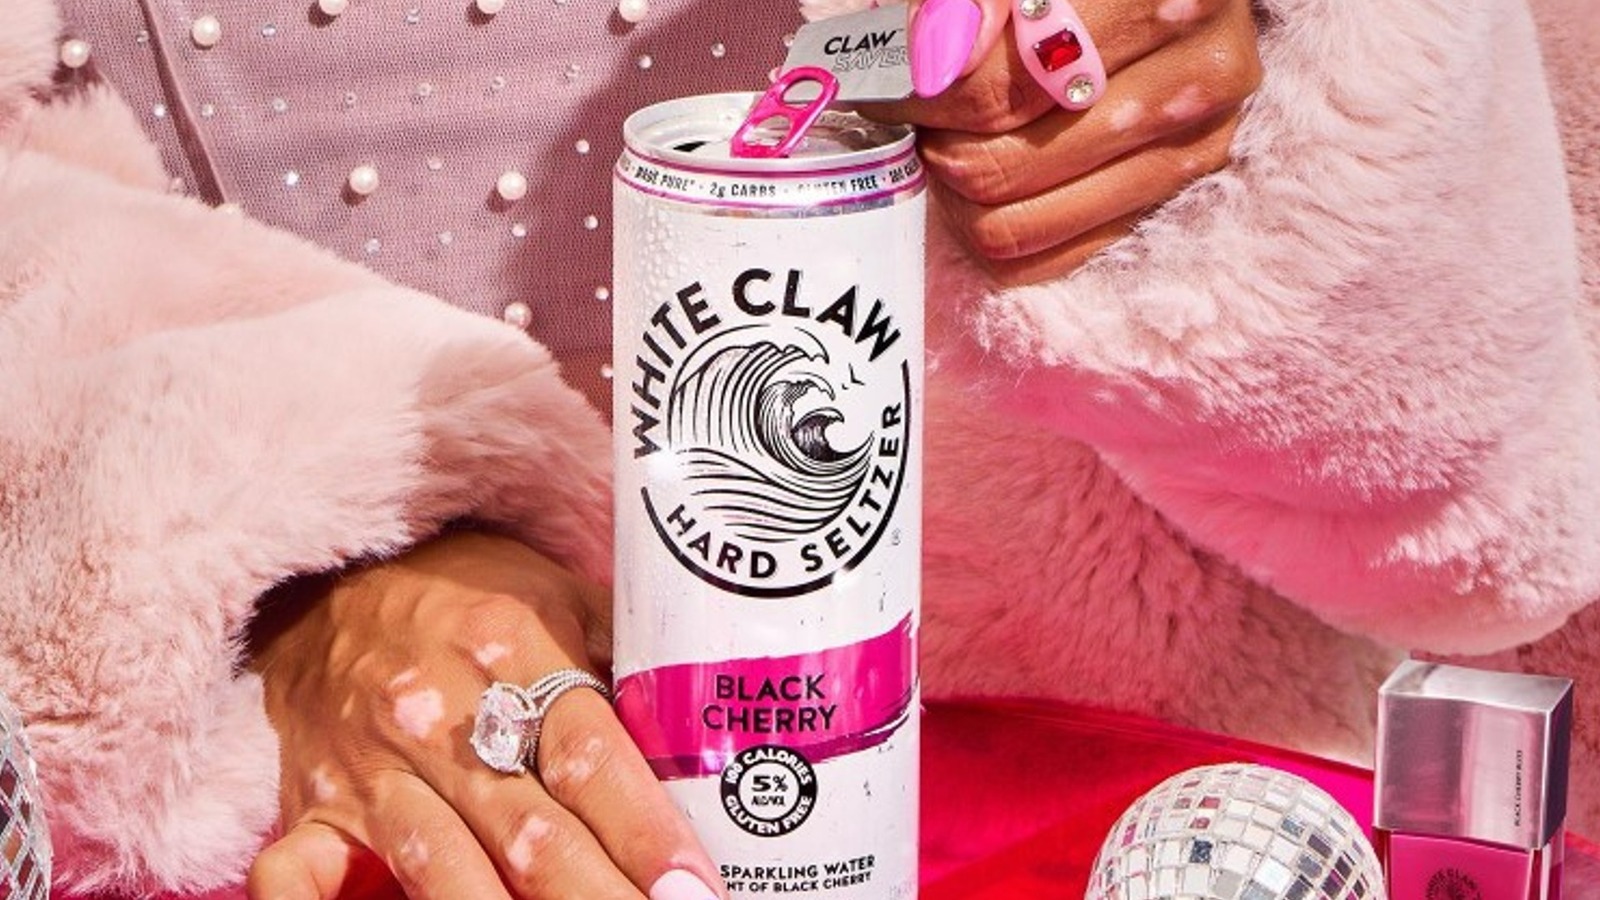 https://www.mashed.com/img/gallery/you-can-now-safely-open-cans-with-white-claw-polished-nails-but-do-you-really-want-to/l-intro-1695743777.jpg